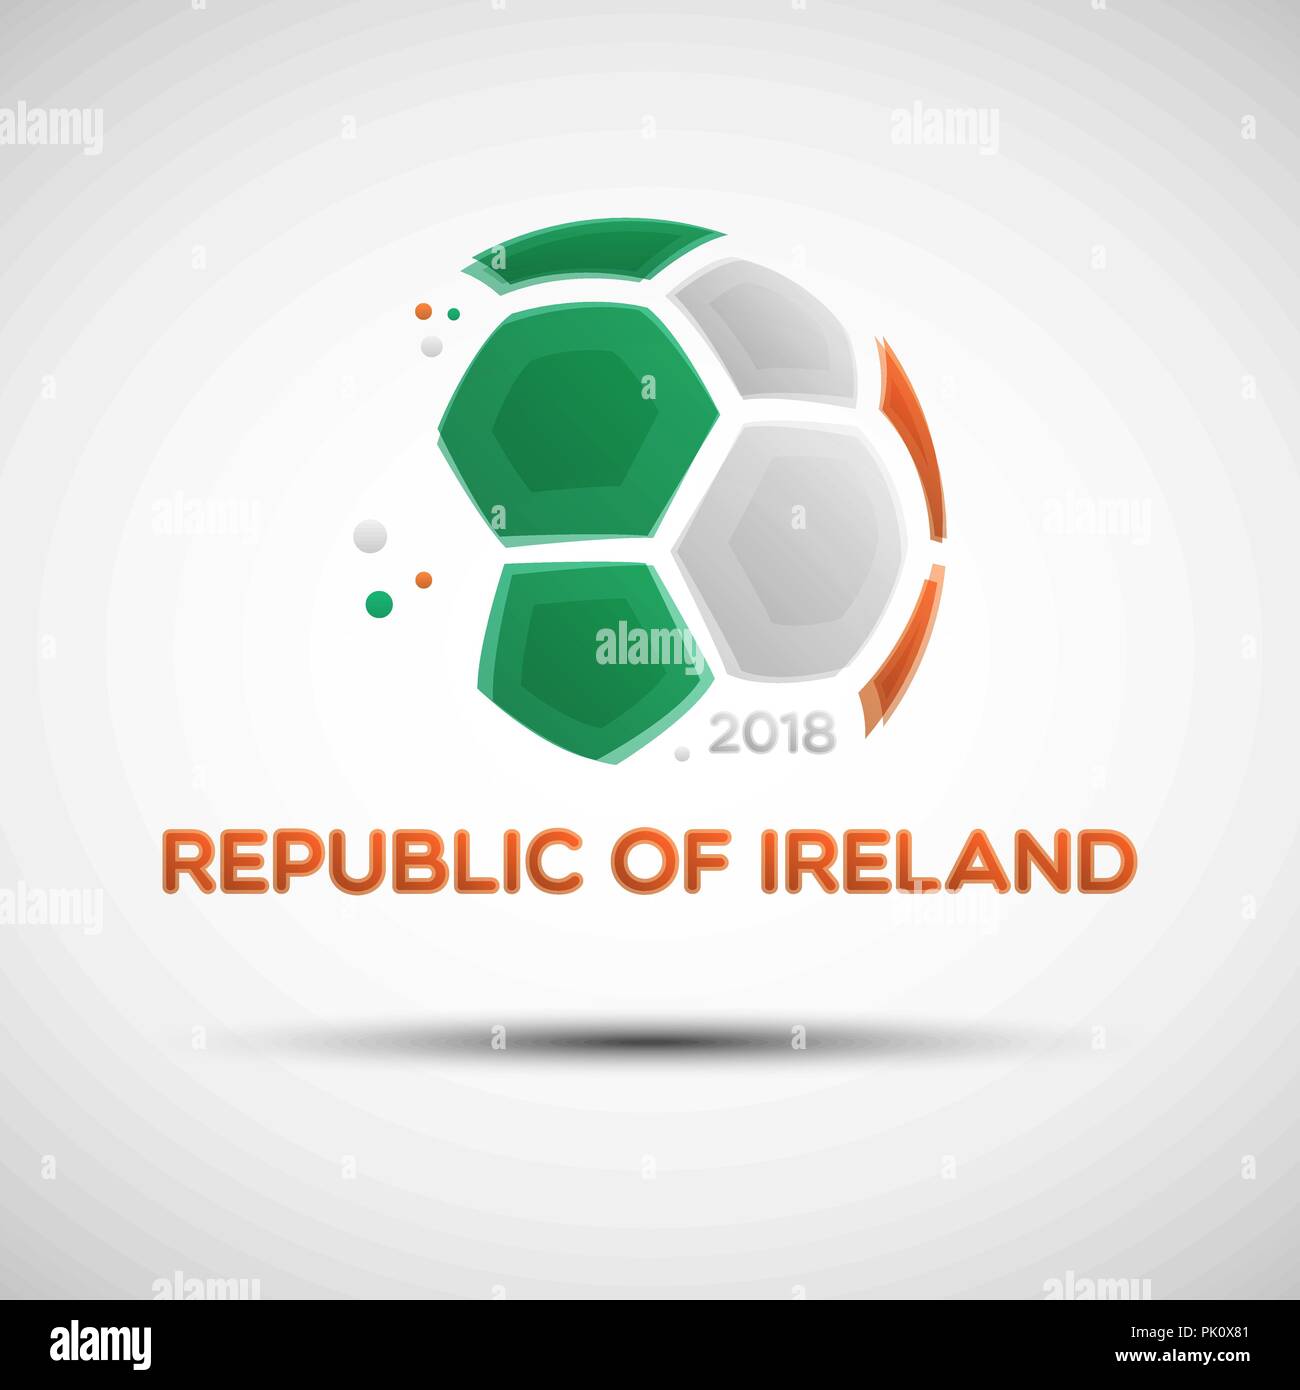 Football championship banner. Flag of Ireland. Vector illustration of abstract soccer ball with Republic of Ireland national flag colors Stock Vector